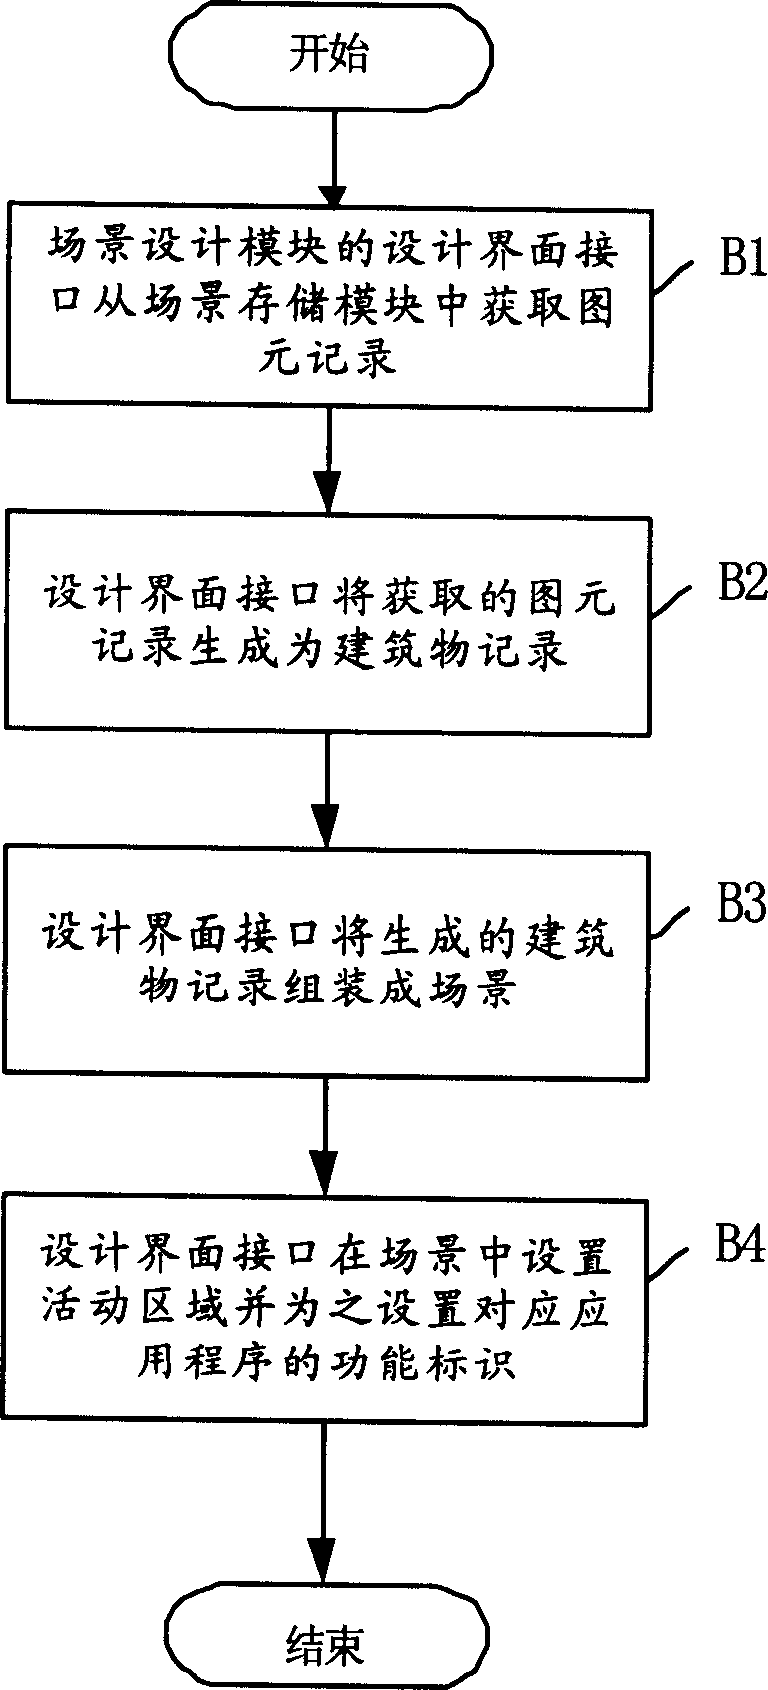 Scene generating method and system for mobile game